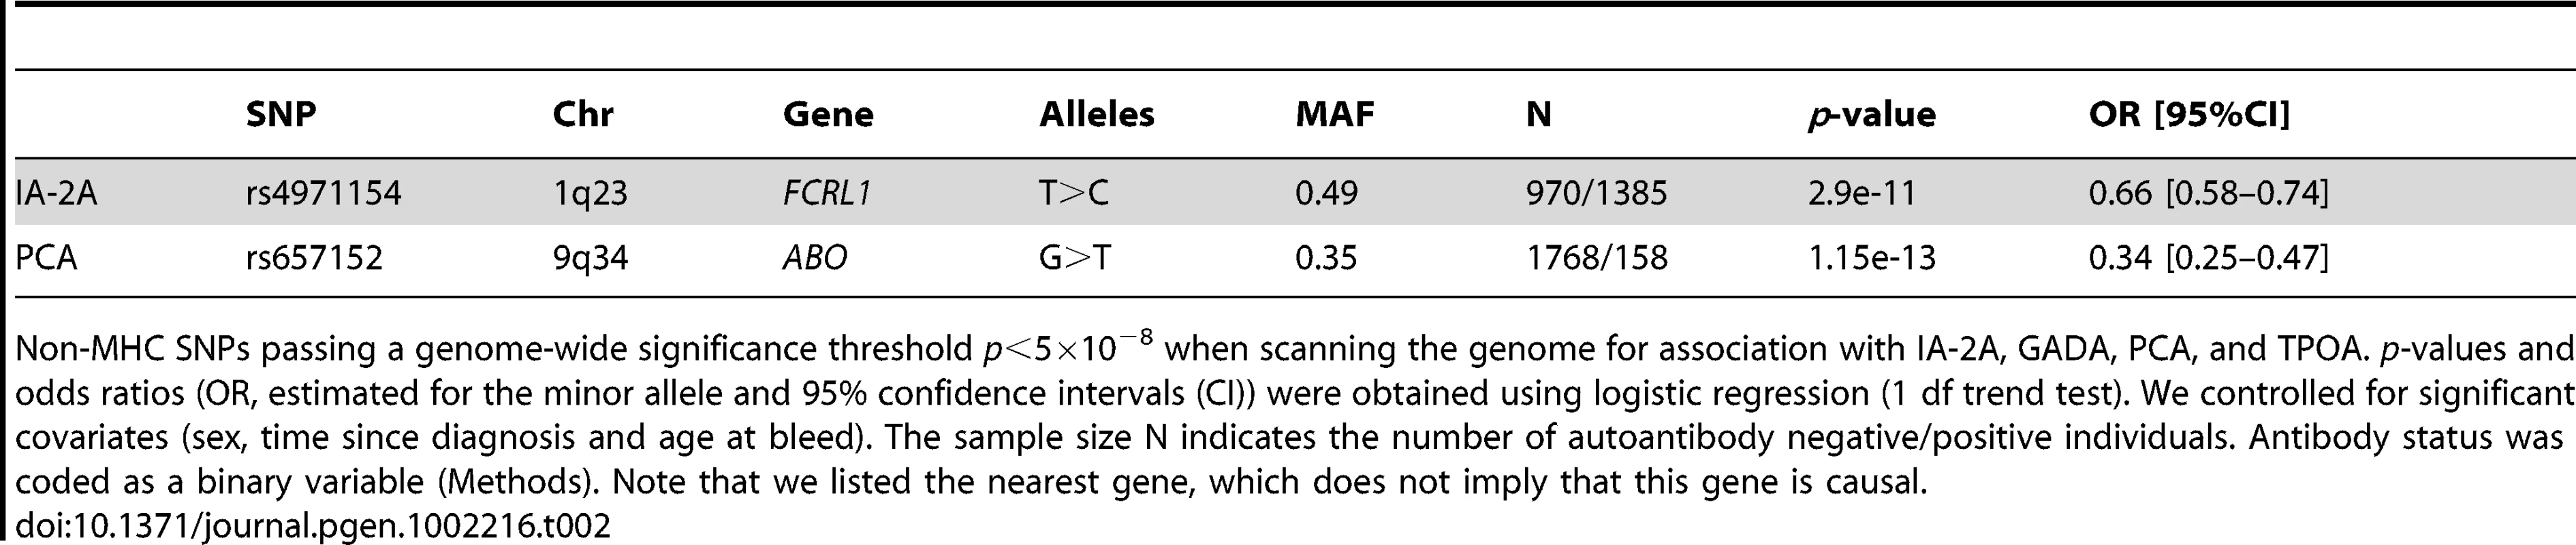 Autoantibody associations passing a genome-wide association significance threshold in the GWA scan (MHC excluded).